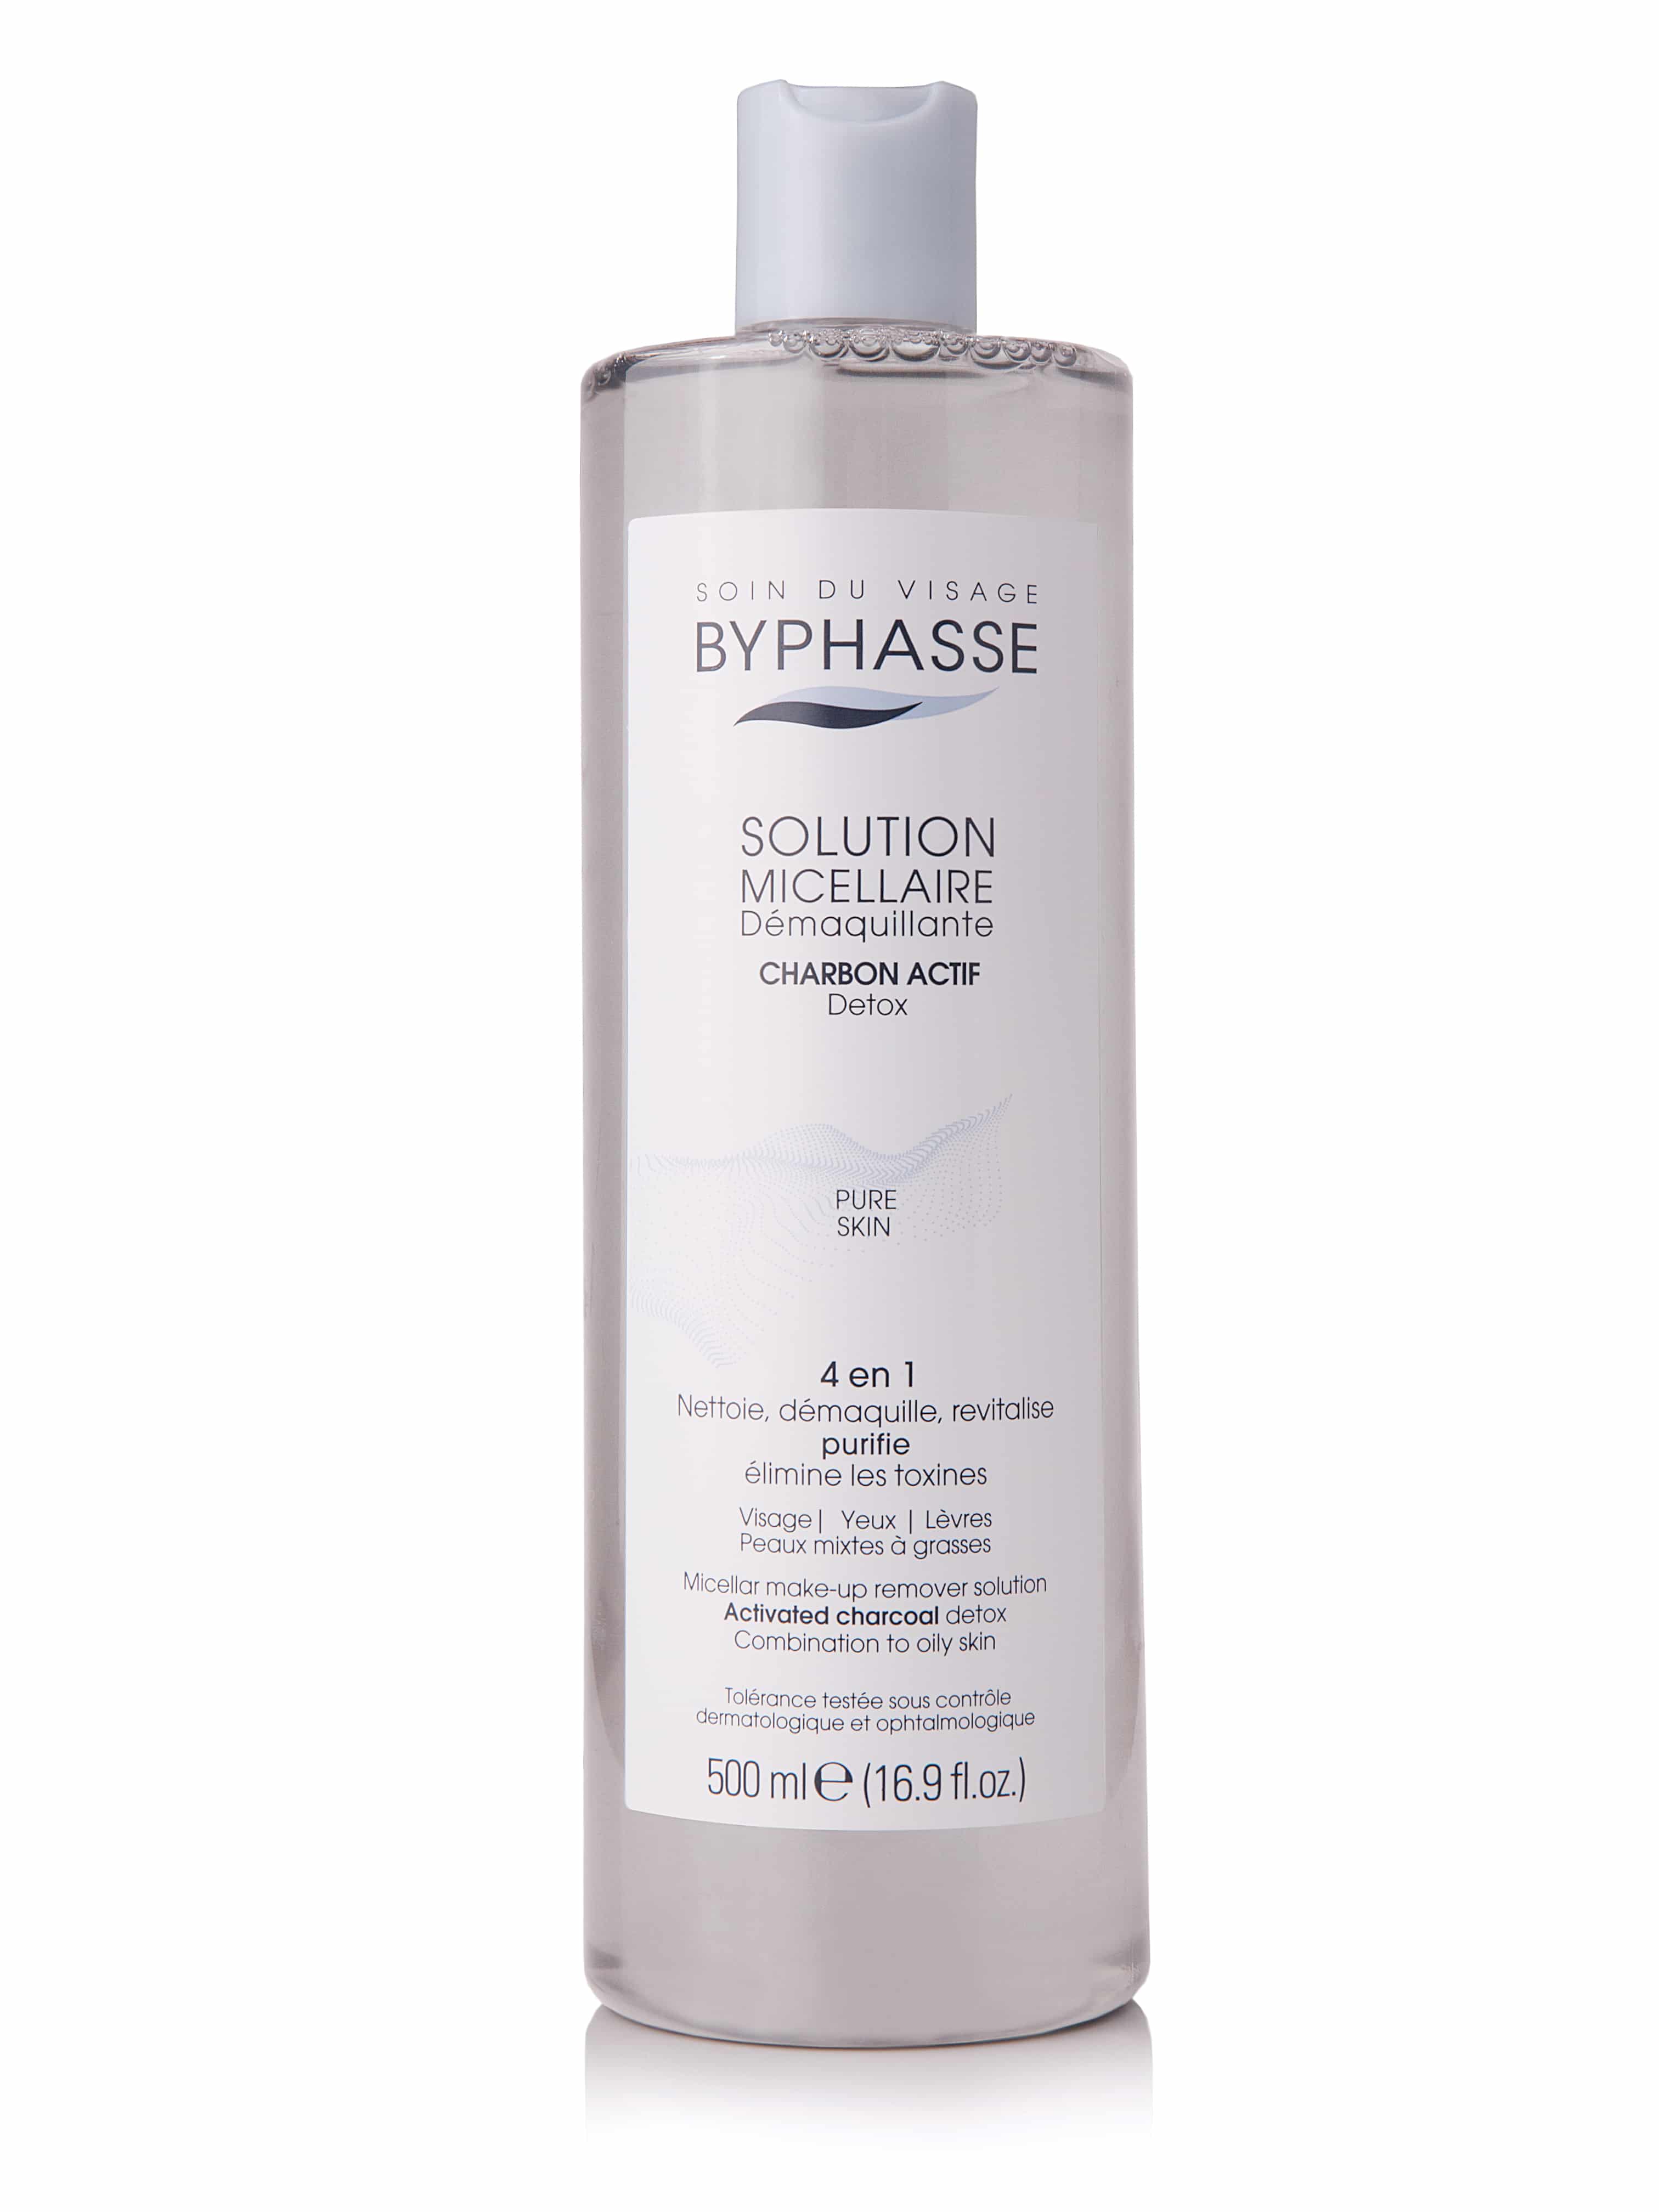 BYPHASSE_SOLUTION_MICELLAIRE_CHARBON_2,99€